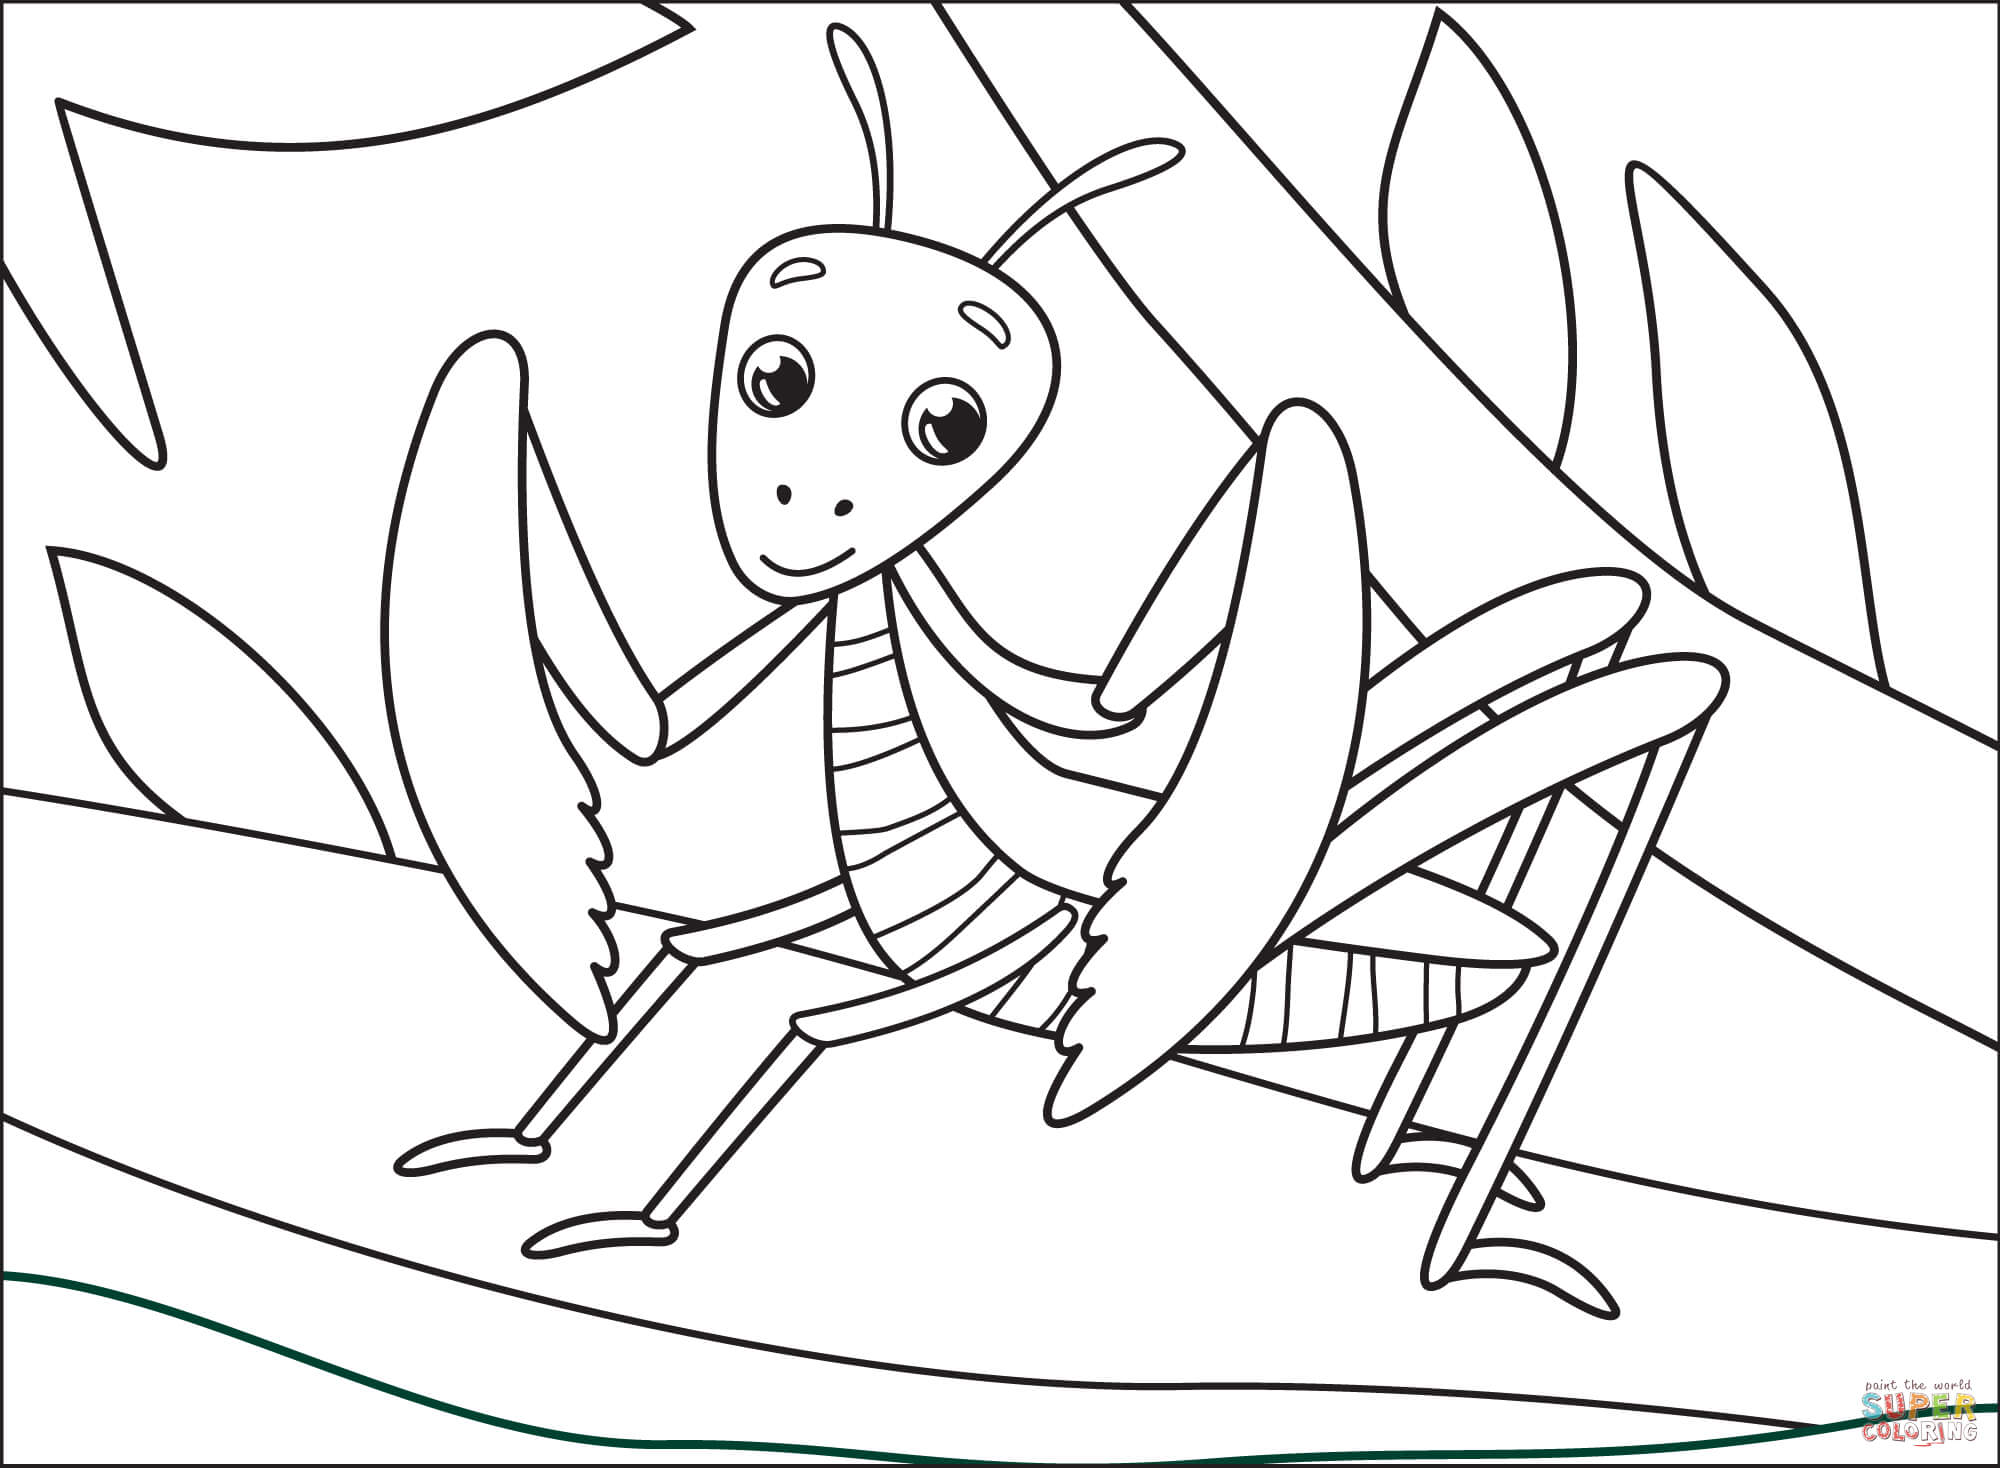 Mantis coloring page free printable coloring pages